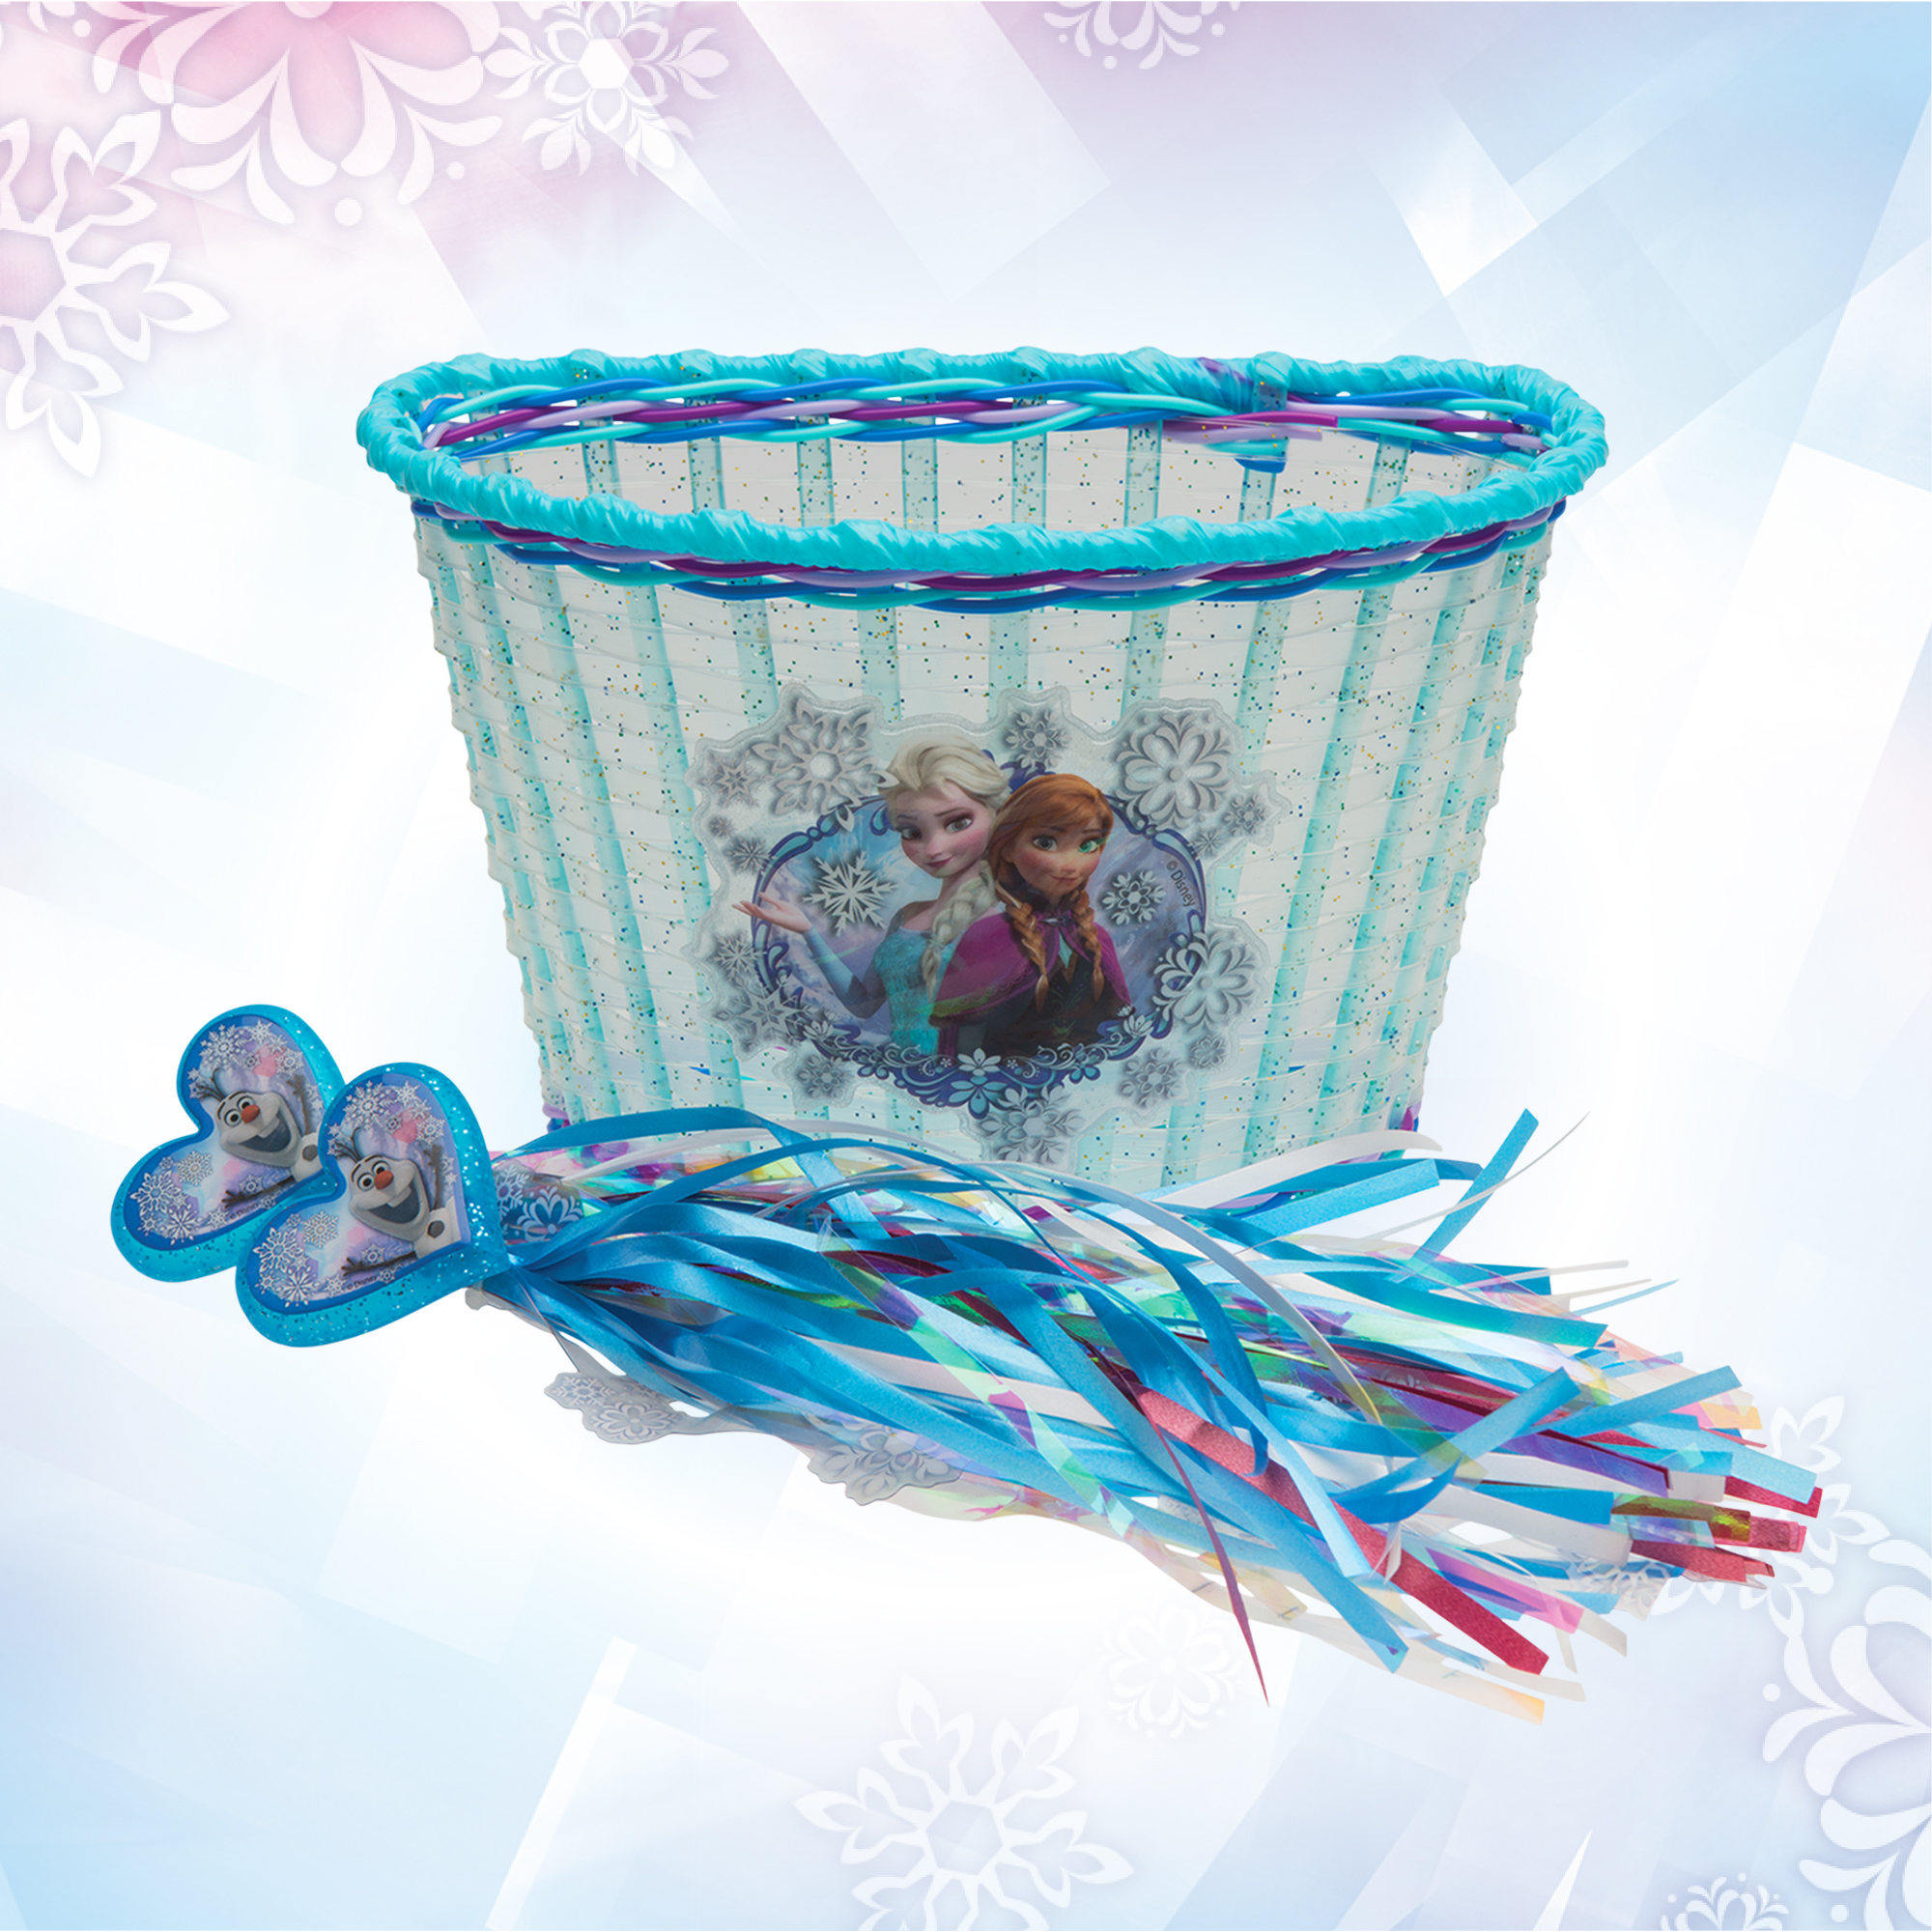 Bell Disney Frozen Accessory Pack Bike Basket and Streamers - image 1 of 4